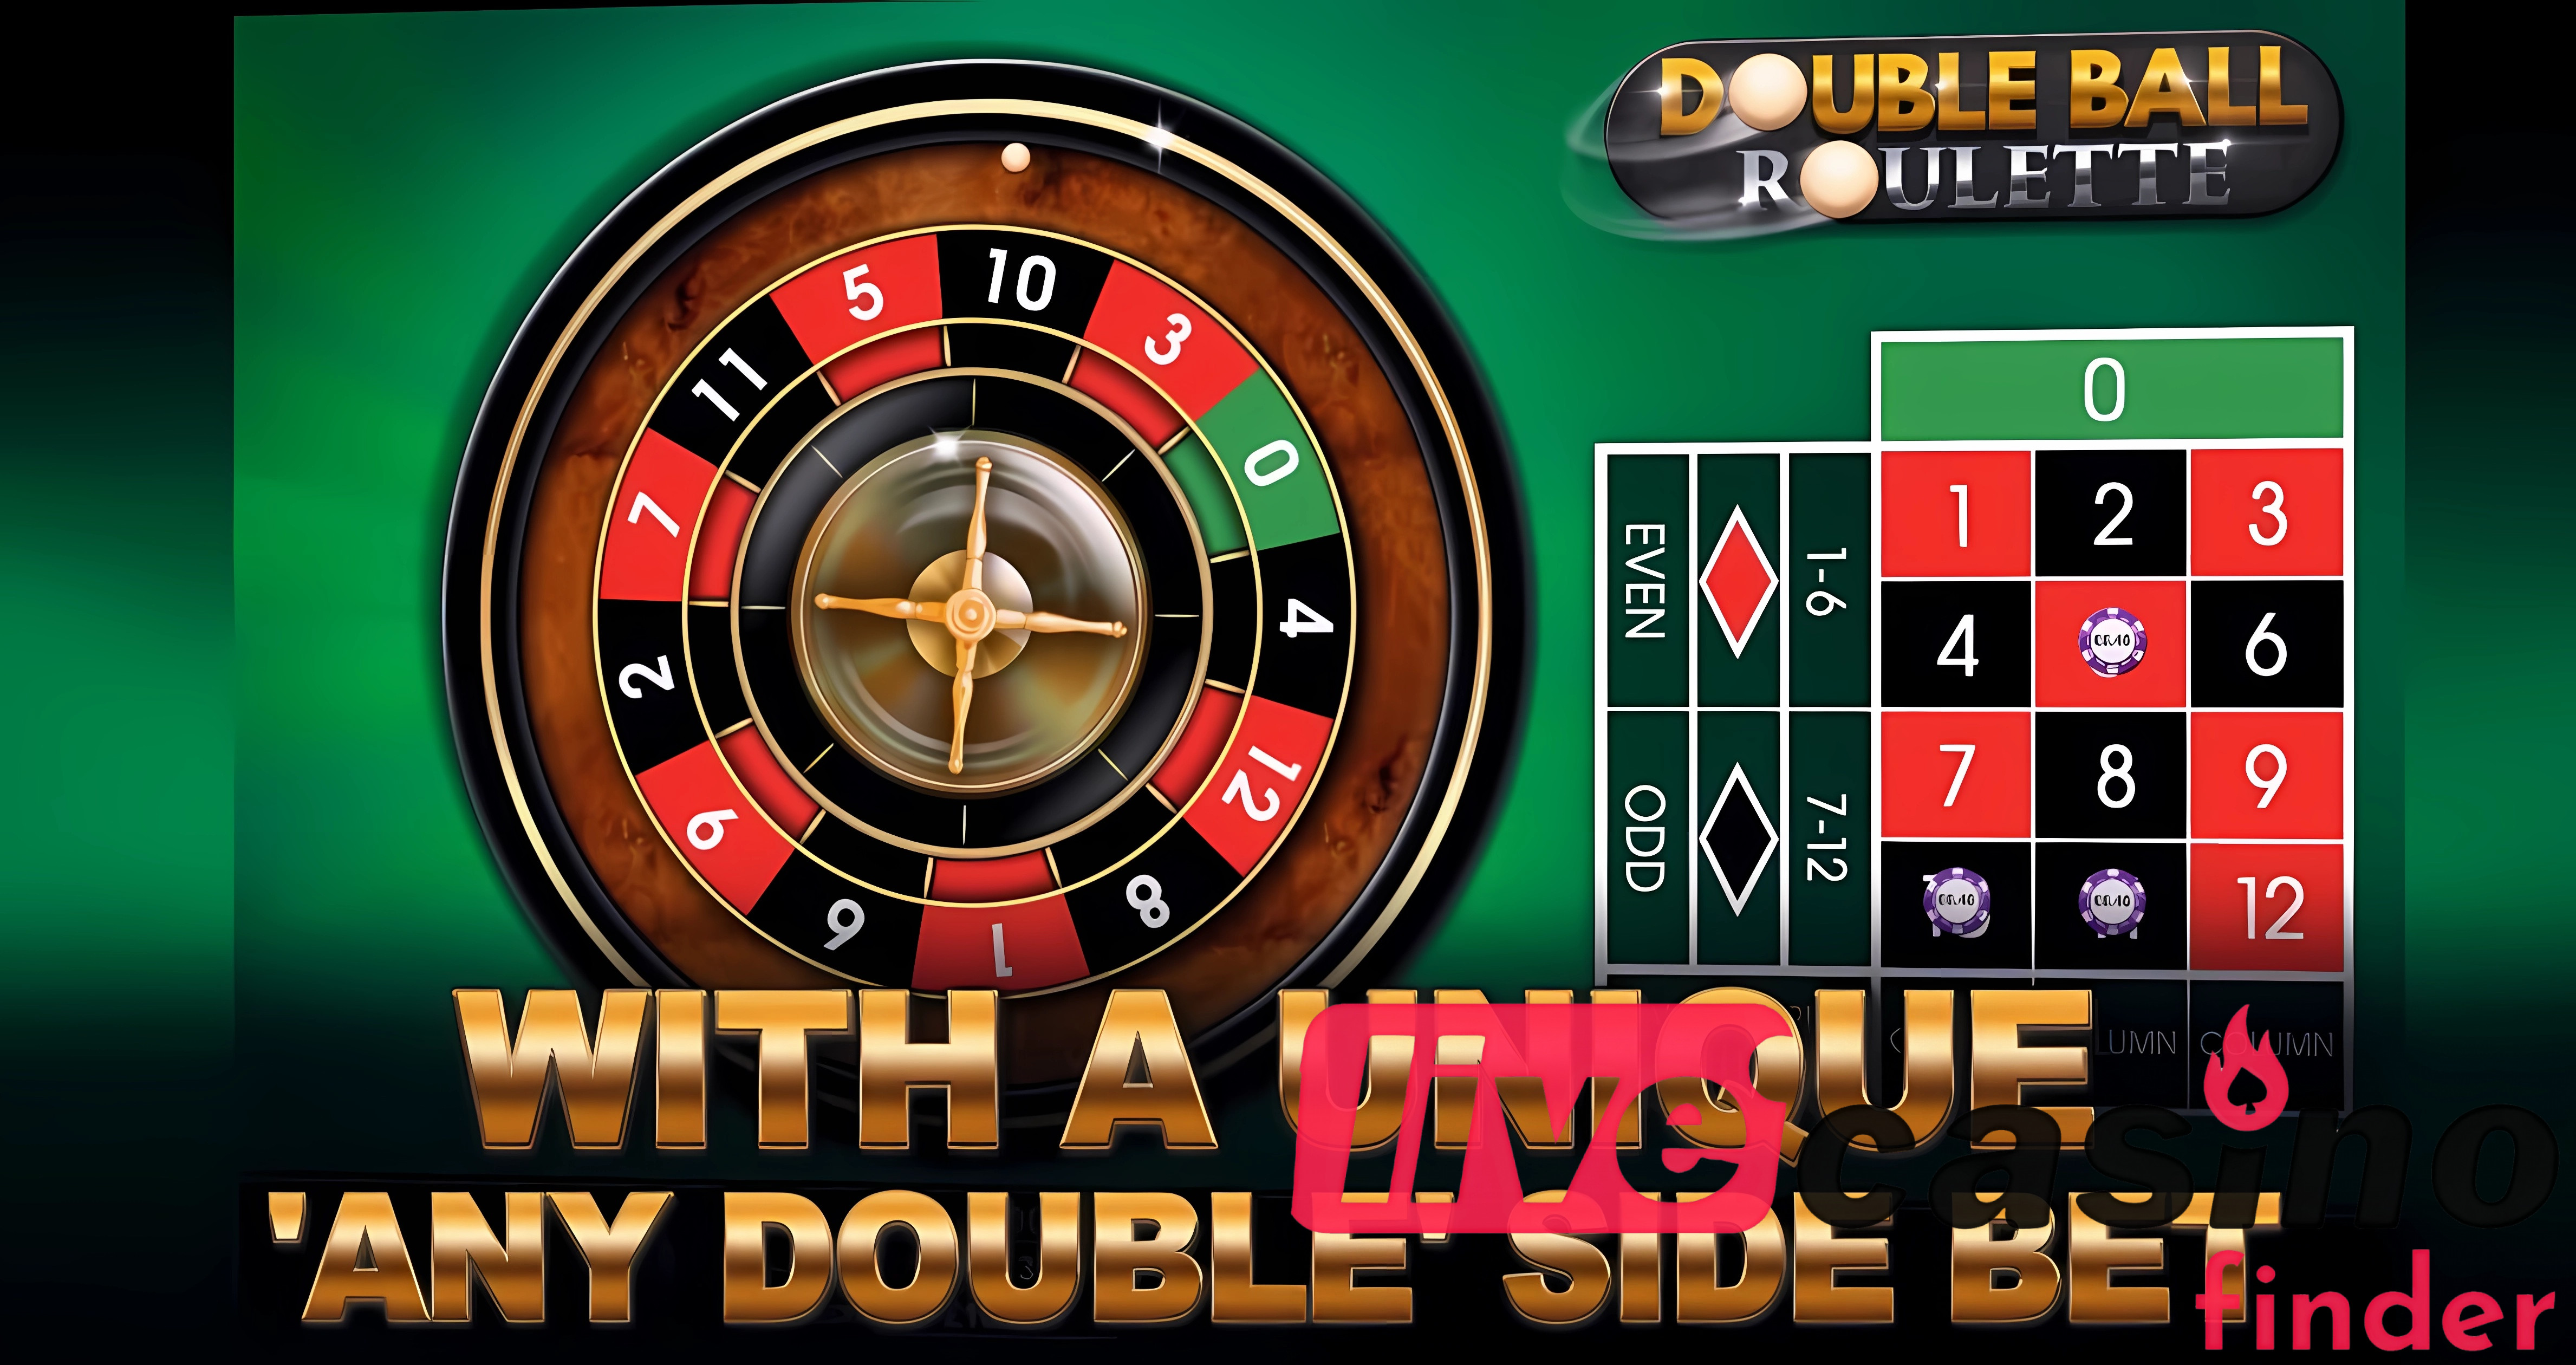 Double Ball Roulette Live How To Play.